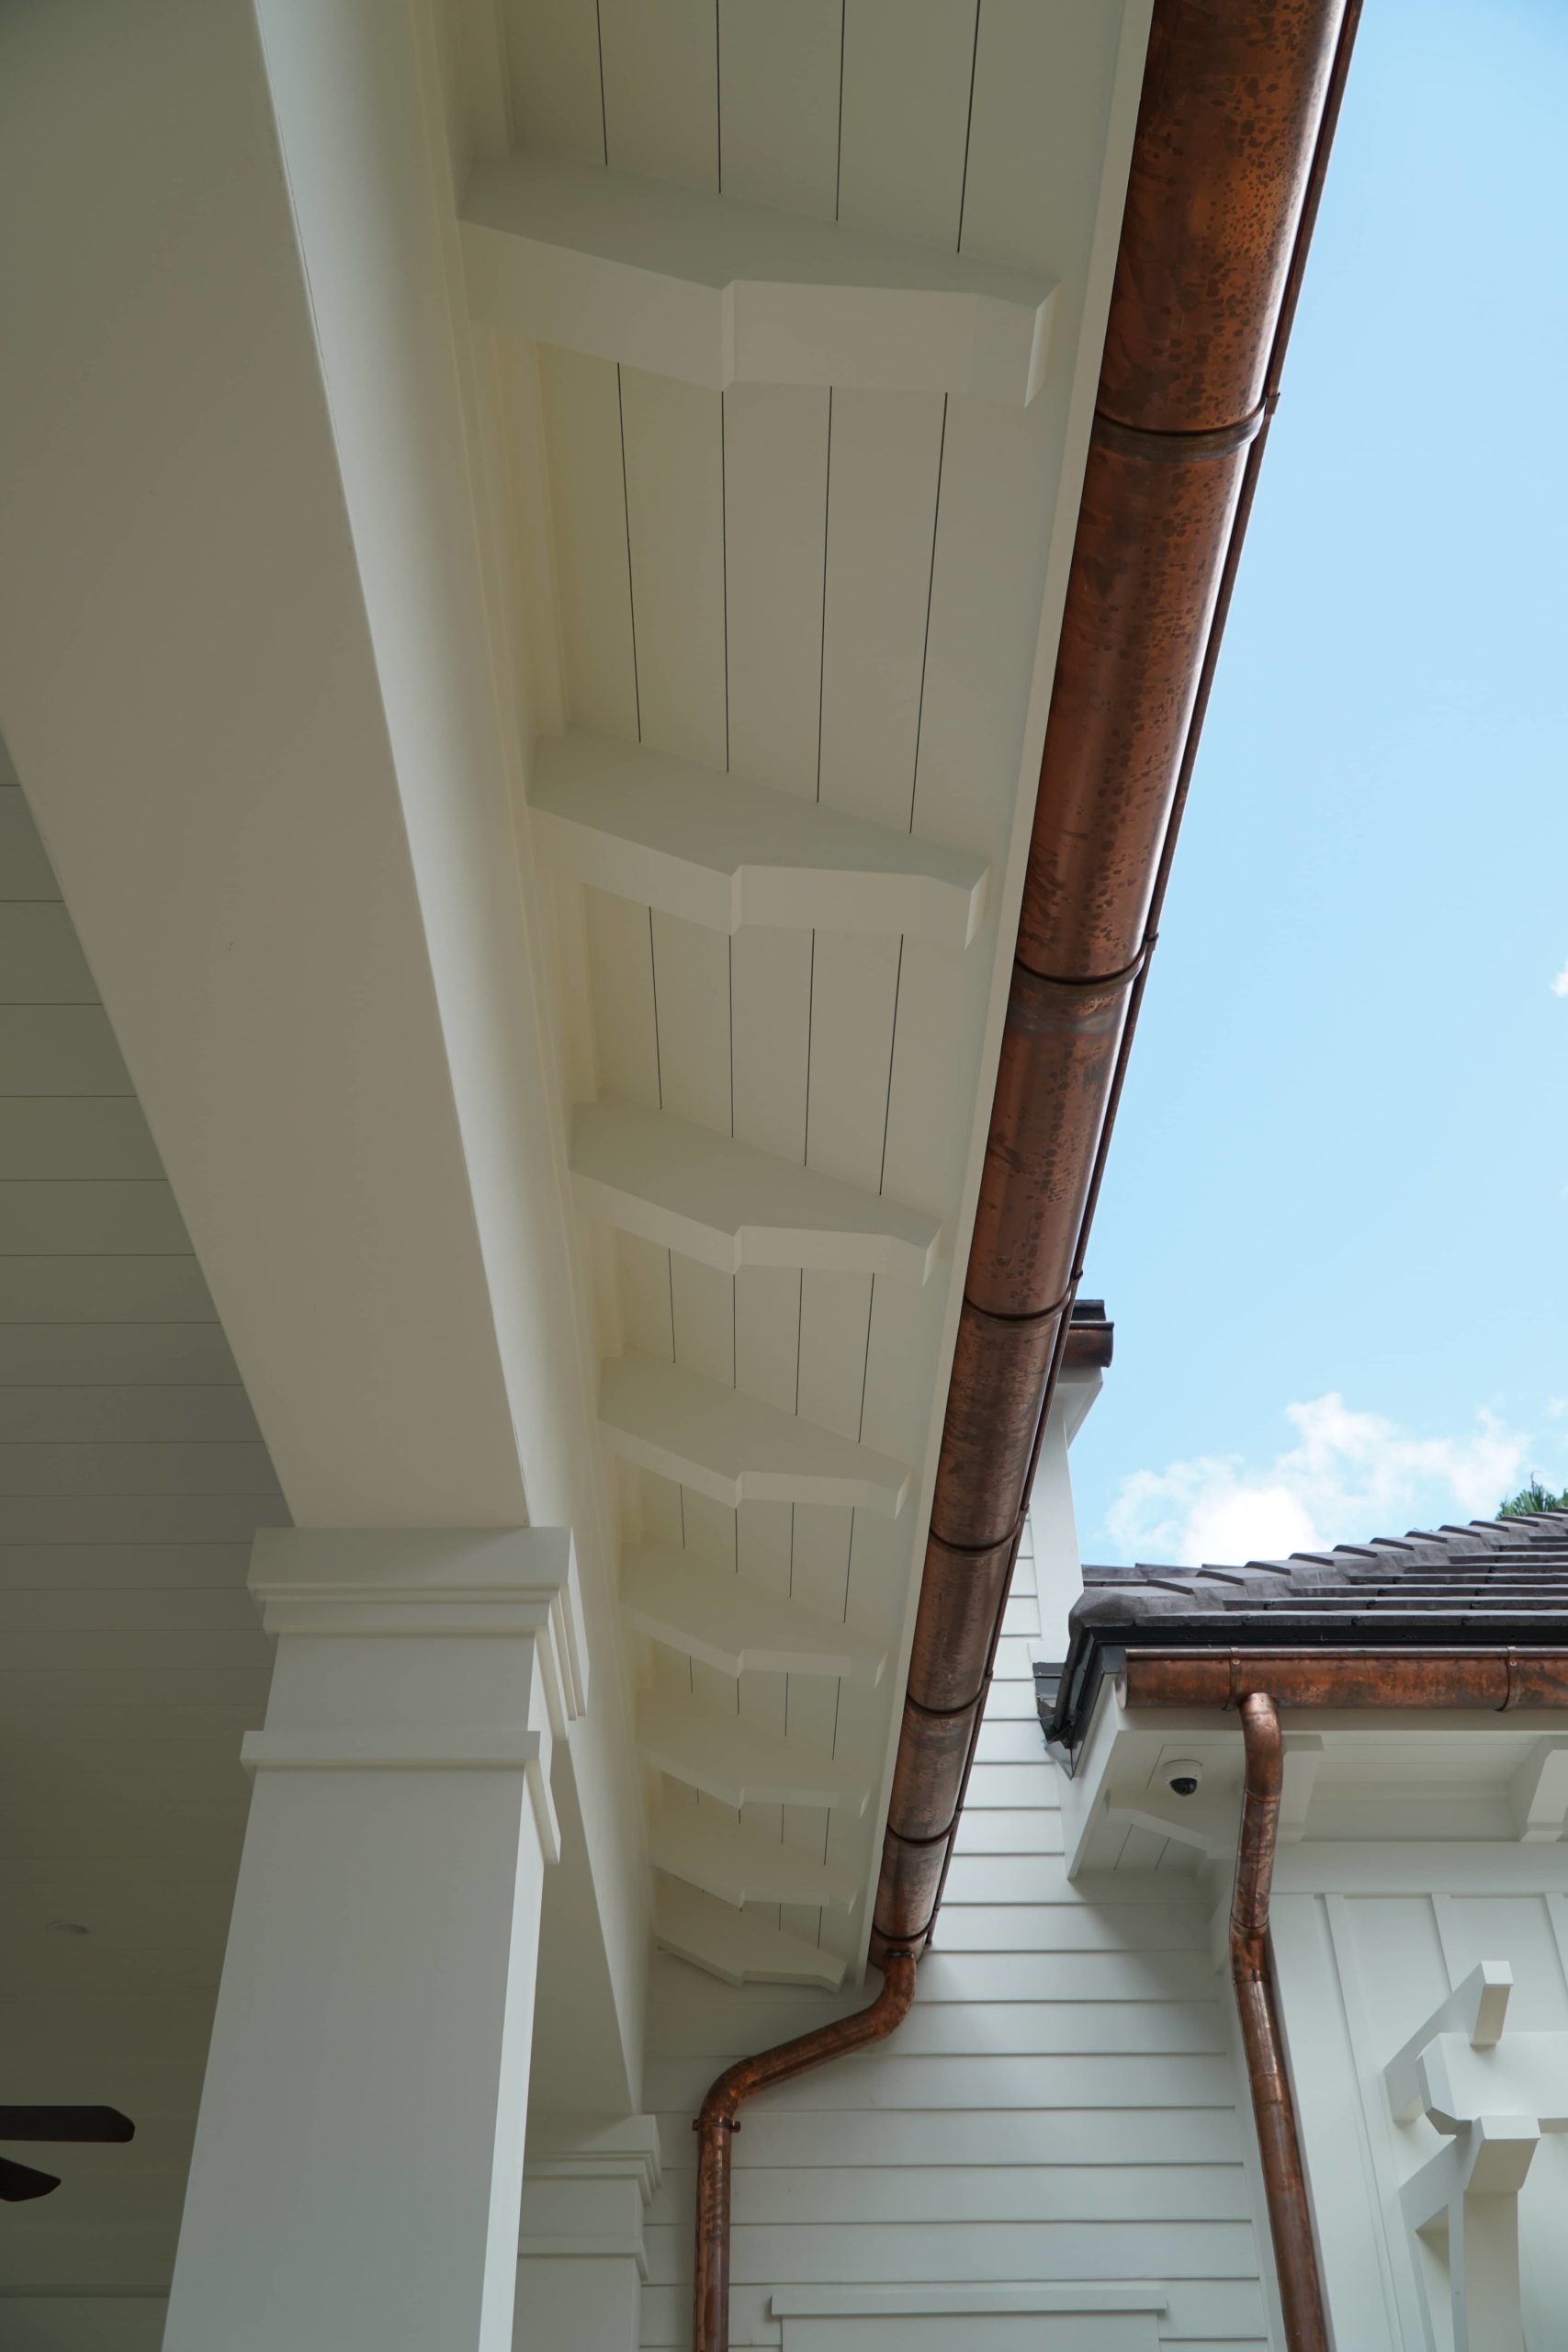 Eaves with decorative cut rafter tails